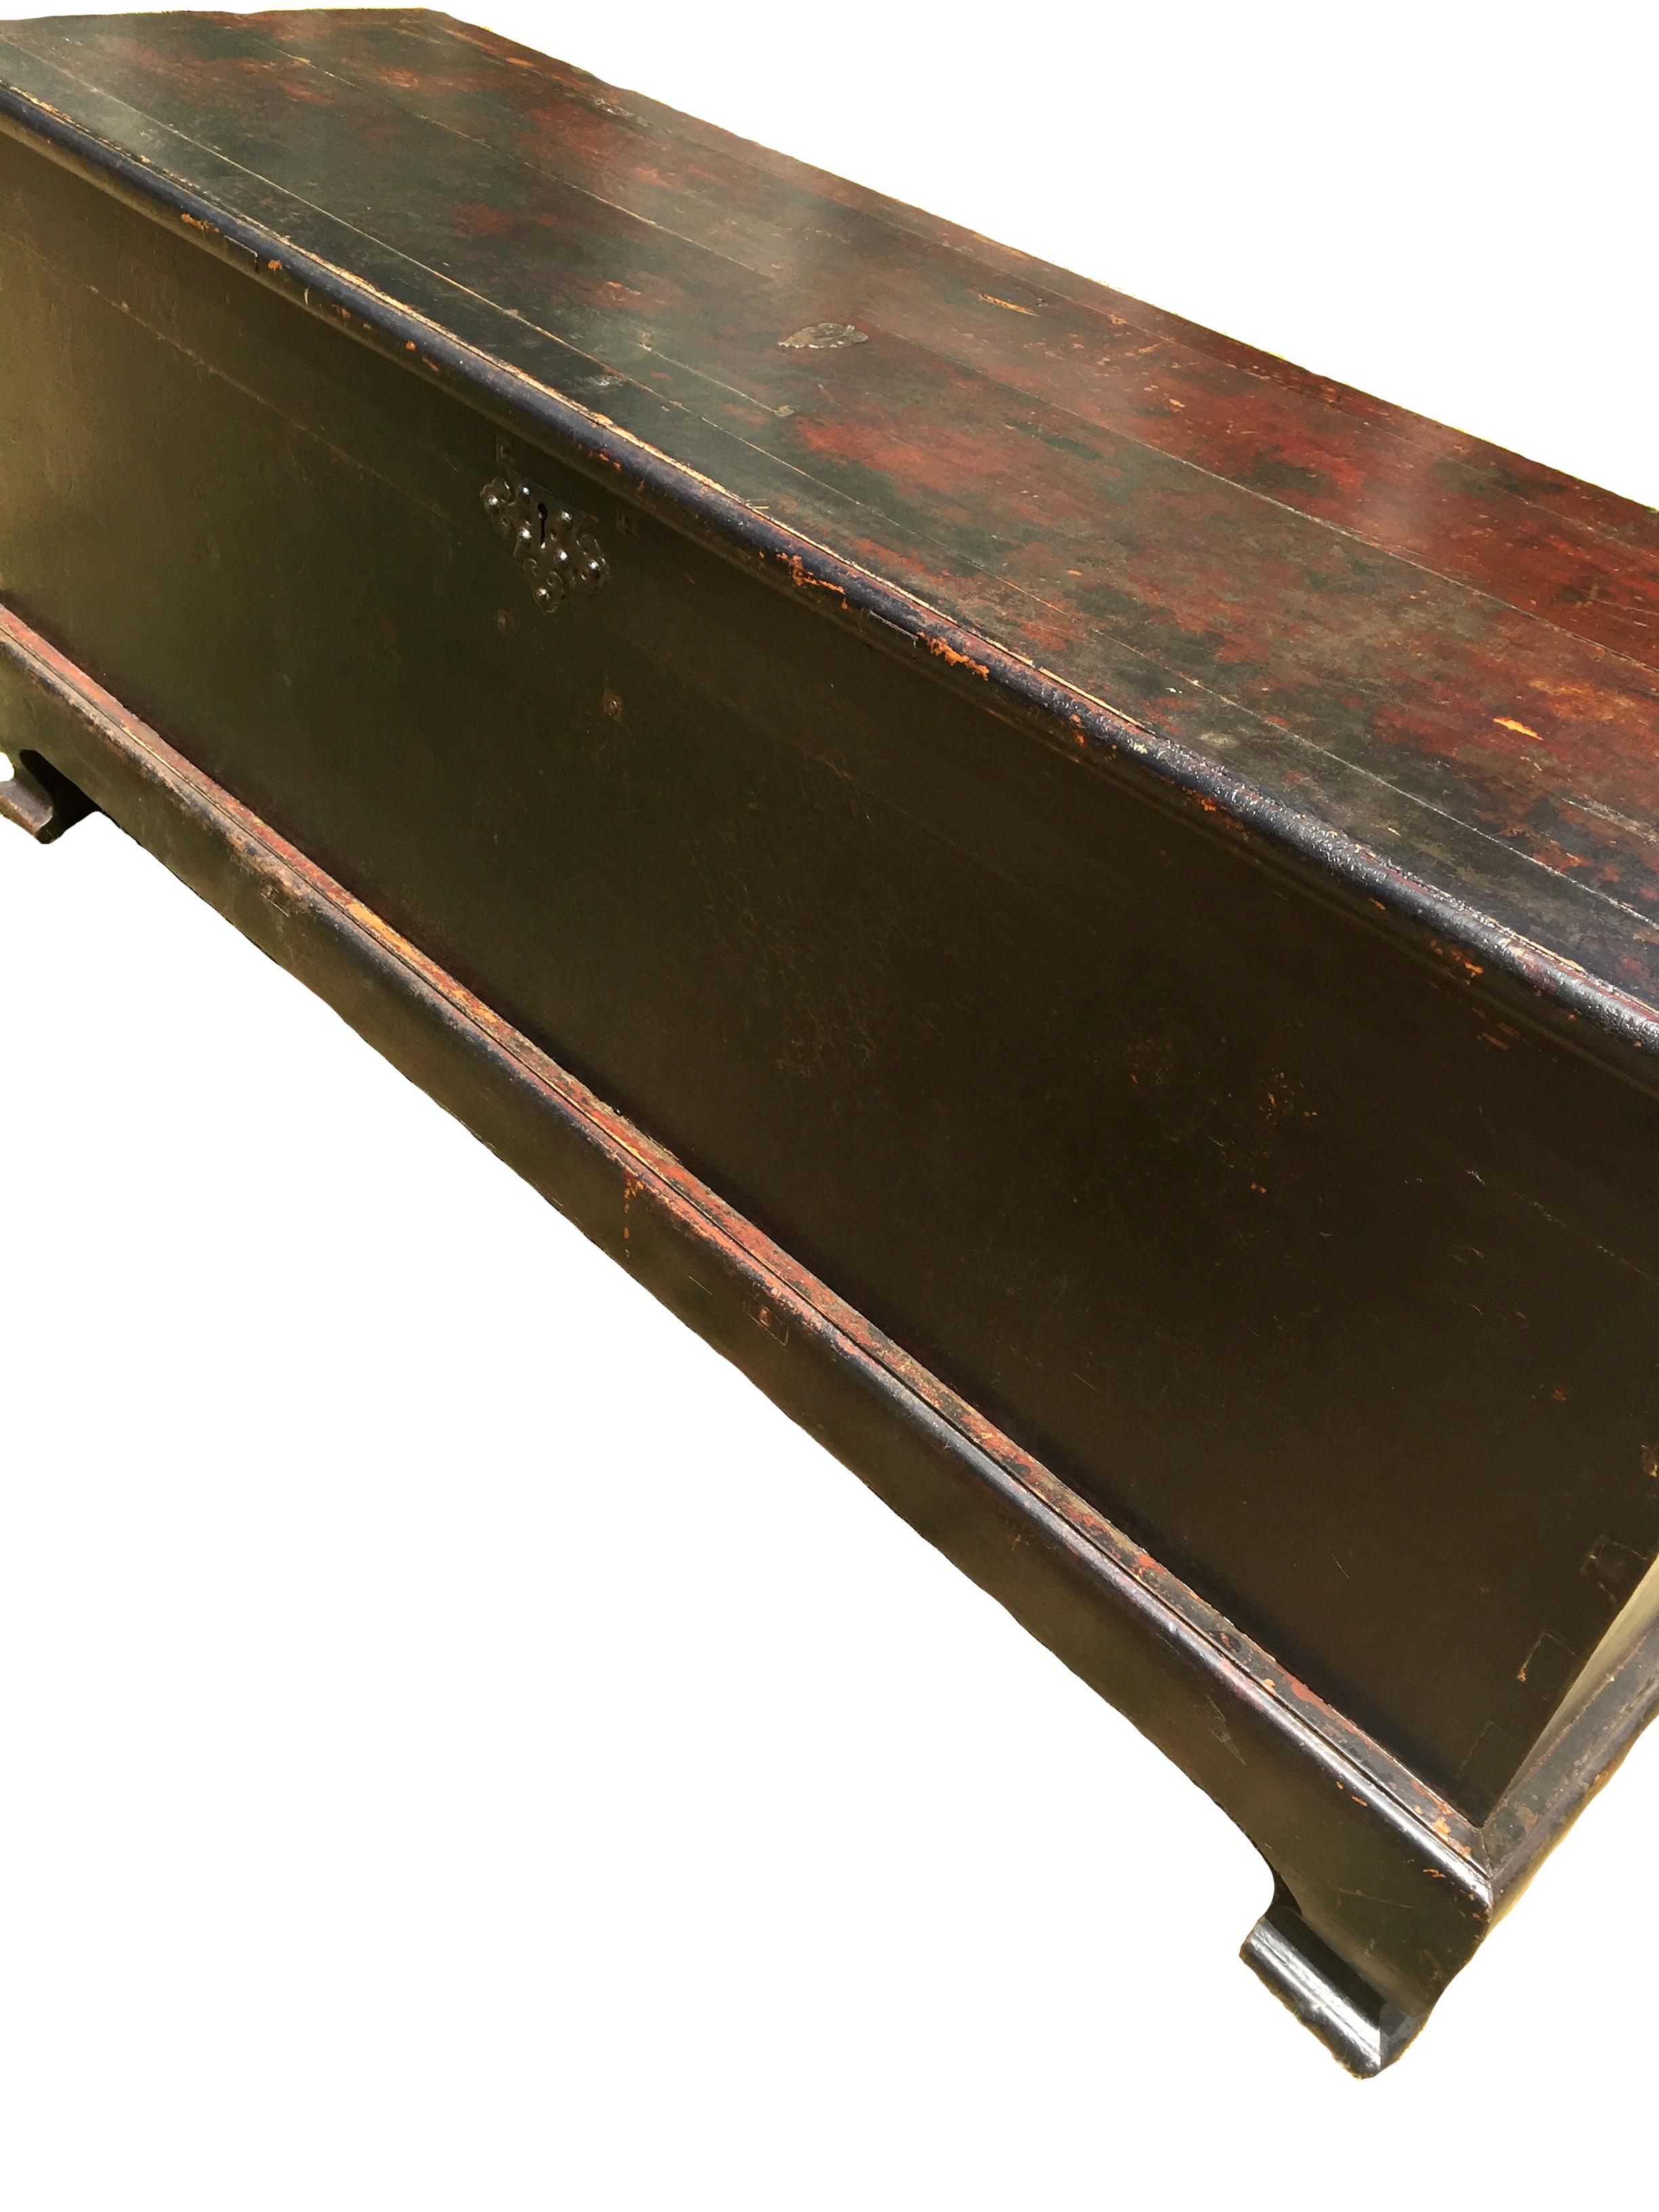 This is an extremely heavy, substantial, over scale trunk from Shan Xi province, China's ancient frontier. The completely solid wood trunk has a thick top that displays beautiful patina achieved over time. The framework and legs are solid and